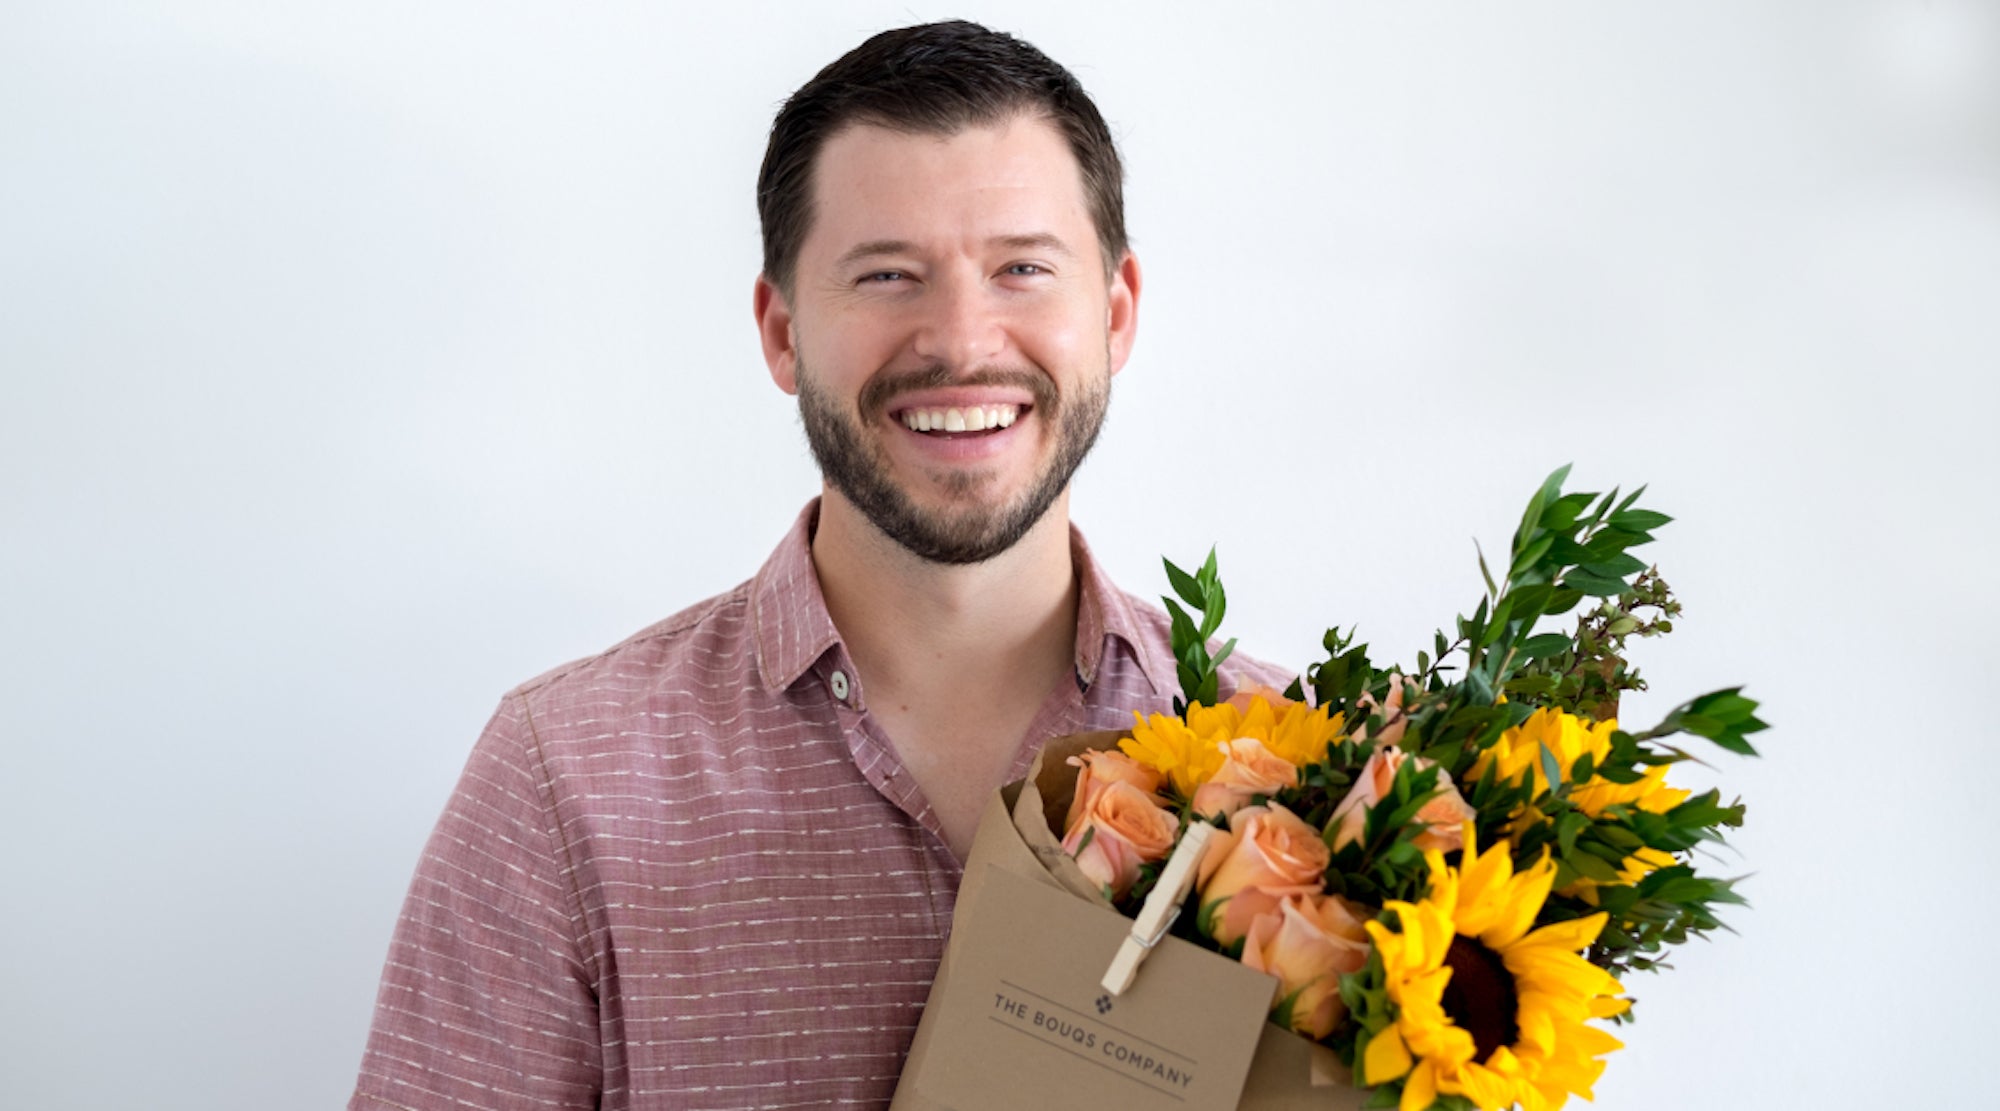 DISRUPTING THE FLORAL BUSINESS